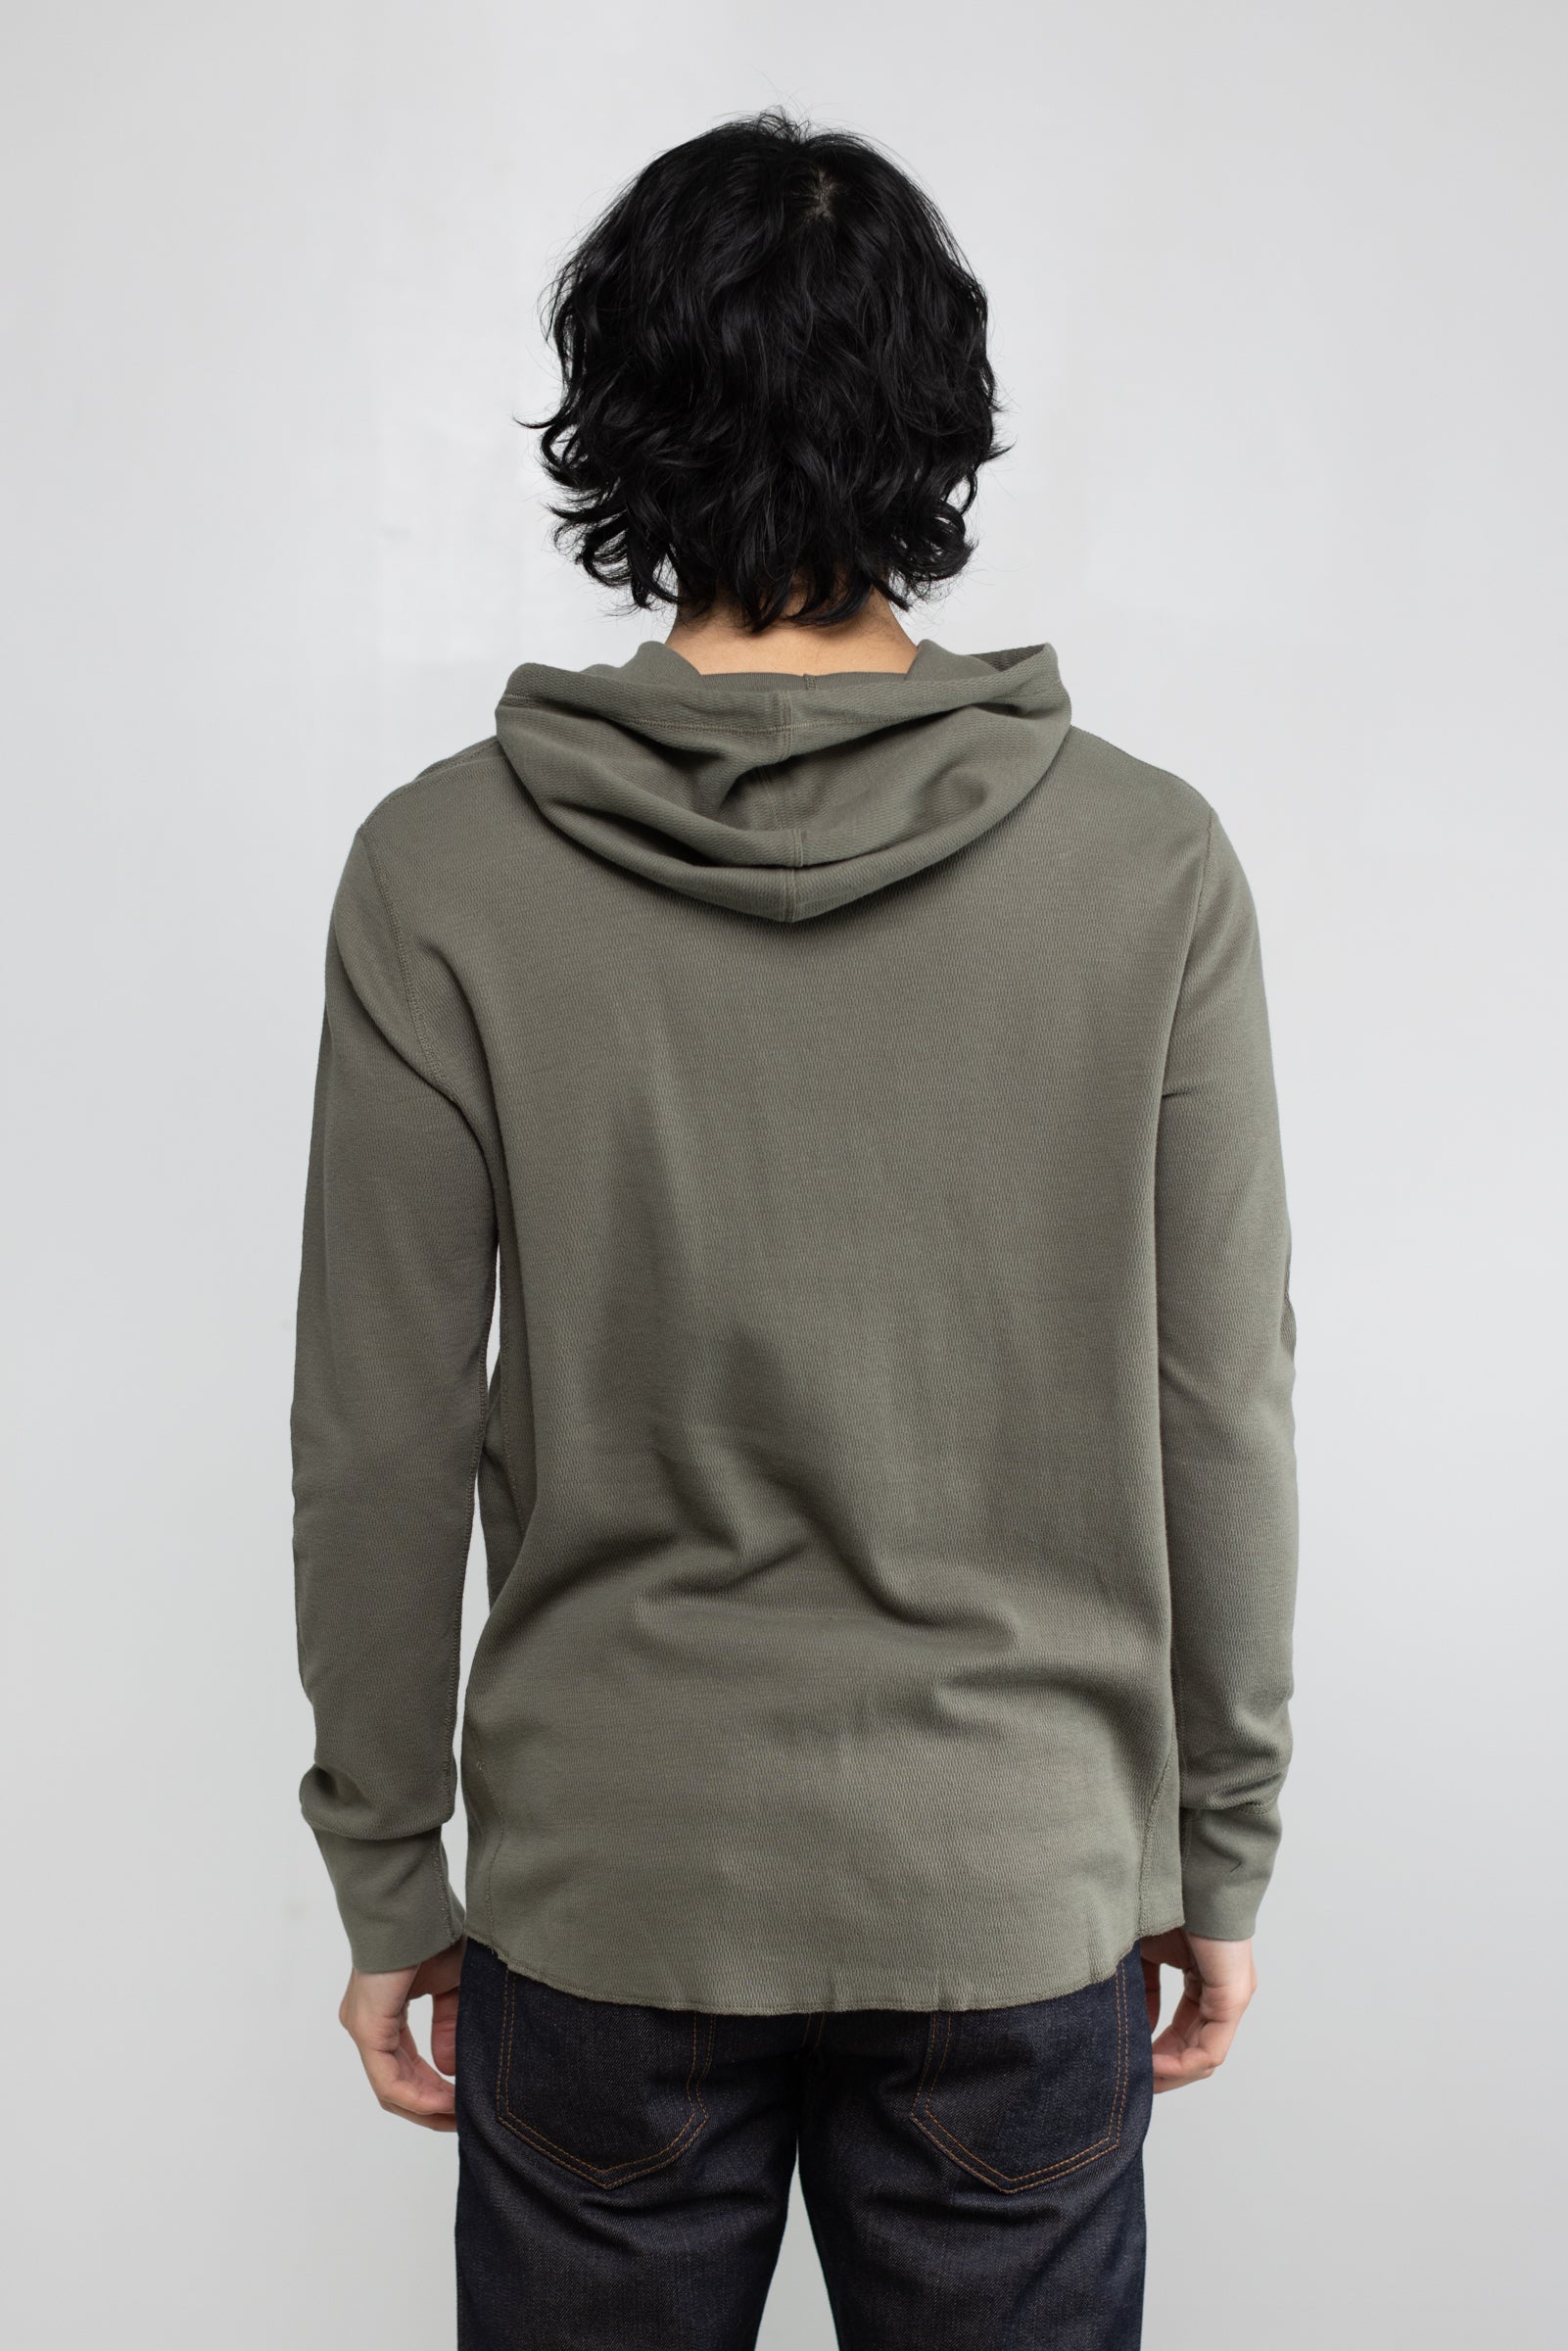 Mesh Thermal Pullover Hoodie in Army Green 03